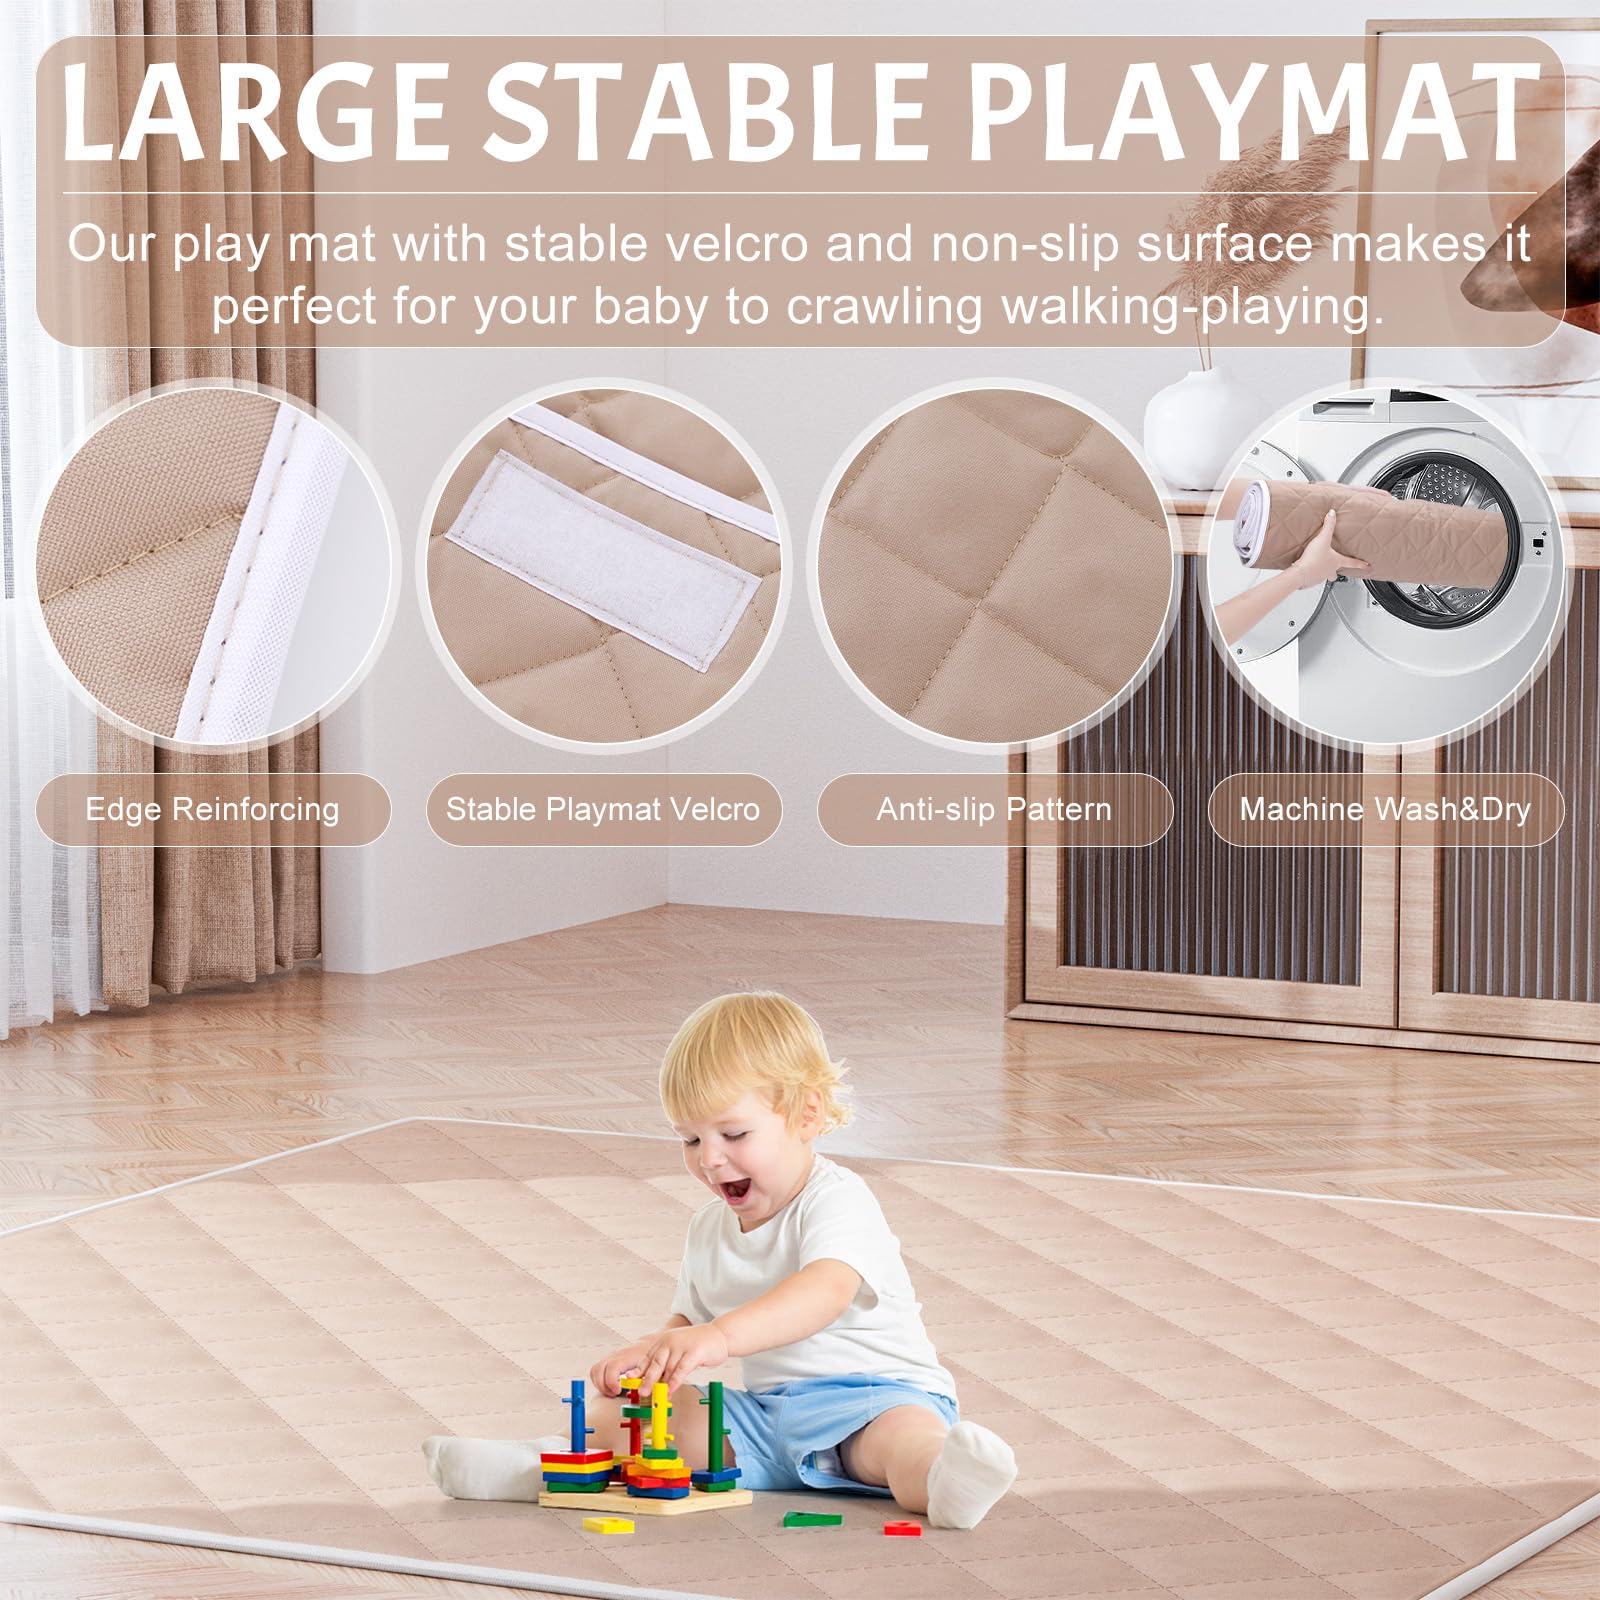 Omzer Baby Playpen with Mat 71"×59" - Extra Large Playpen for Babies and Toddlers with Mat Included, Safety Playard for Baby with Gate, All-Wrapped Soft Sponge Baby Gate Playpen with Stable Mat Velcro